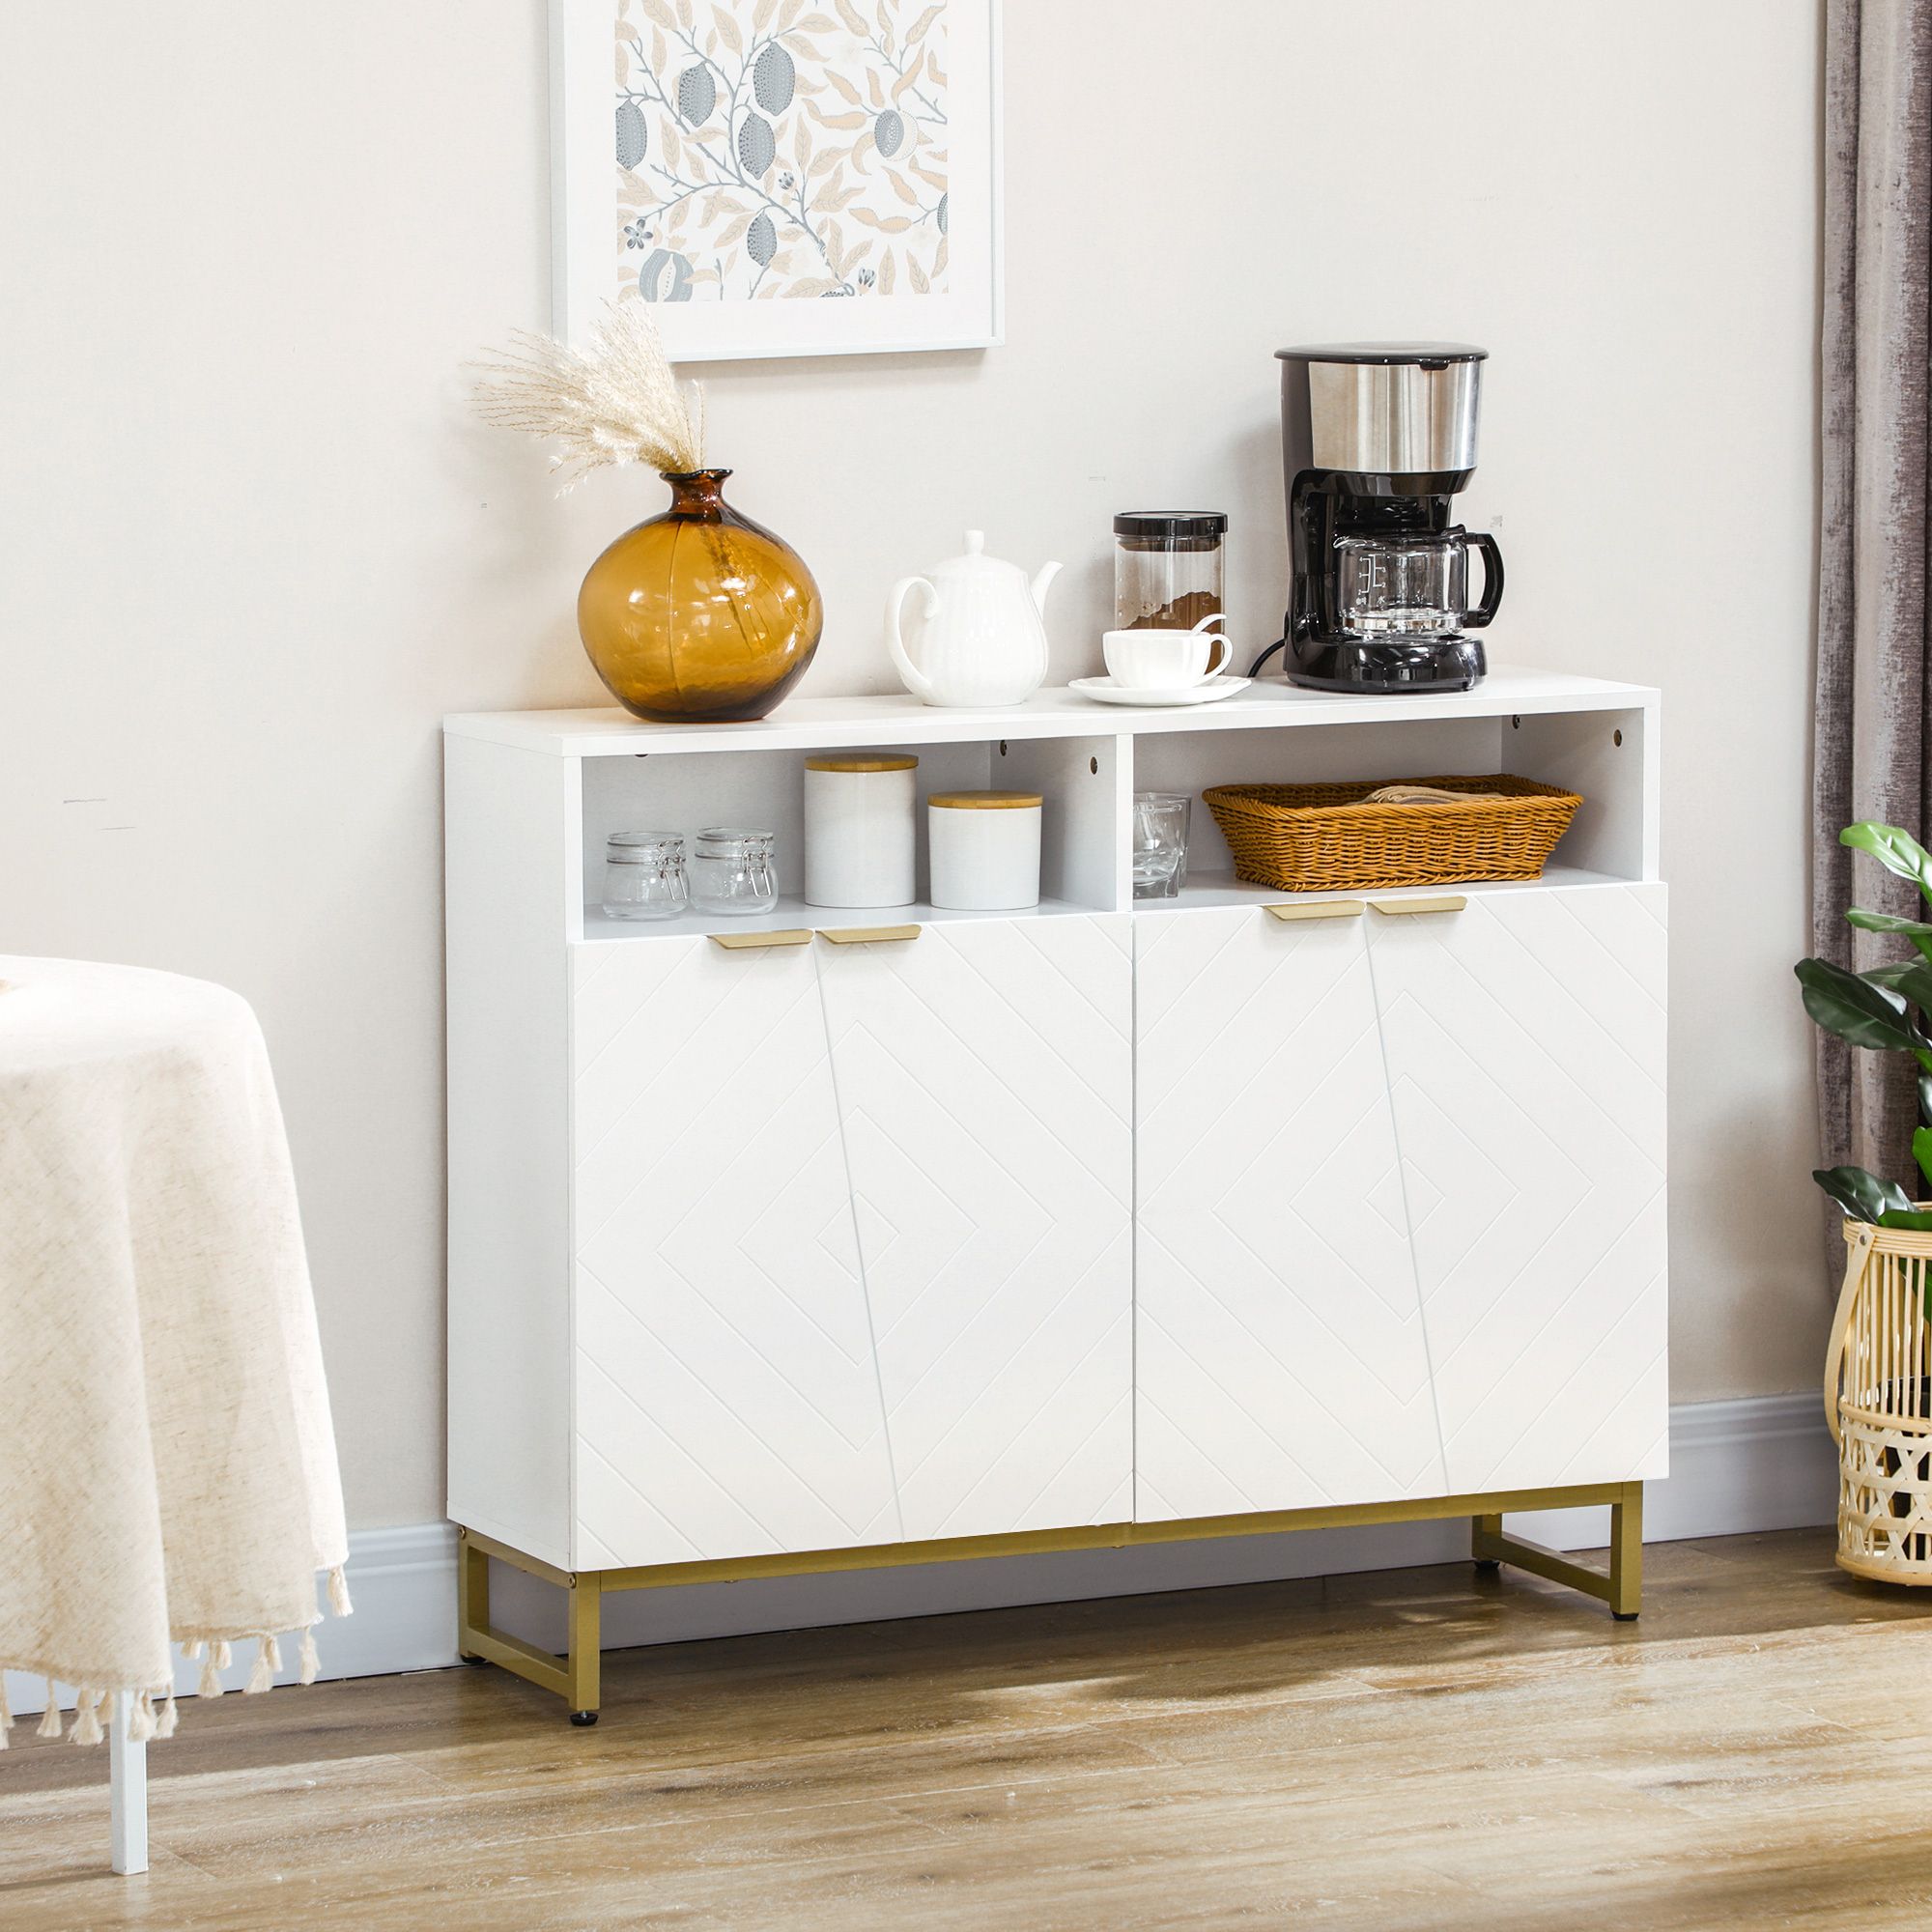 Homcom Accent Sideboards, Kitchen Storage Cabinet With 4 Doors, Adjustable  Shelves, Metal Base For Living Room, Hallway, White | Aosom Canada For Sideboards With Adjustable Shelves (Gallery 13 of 20)